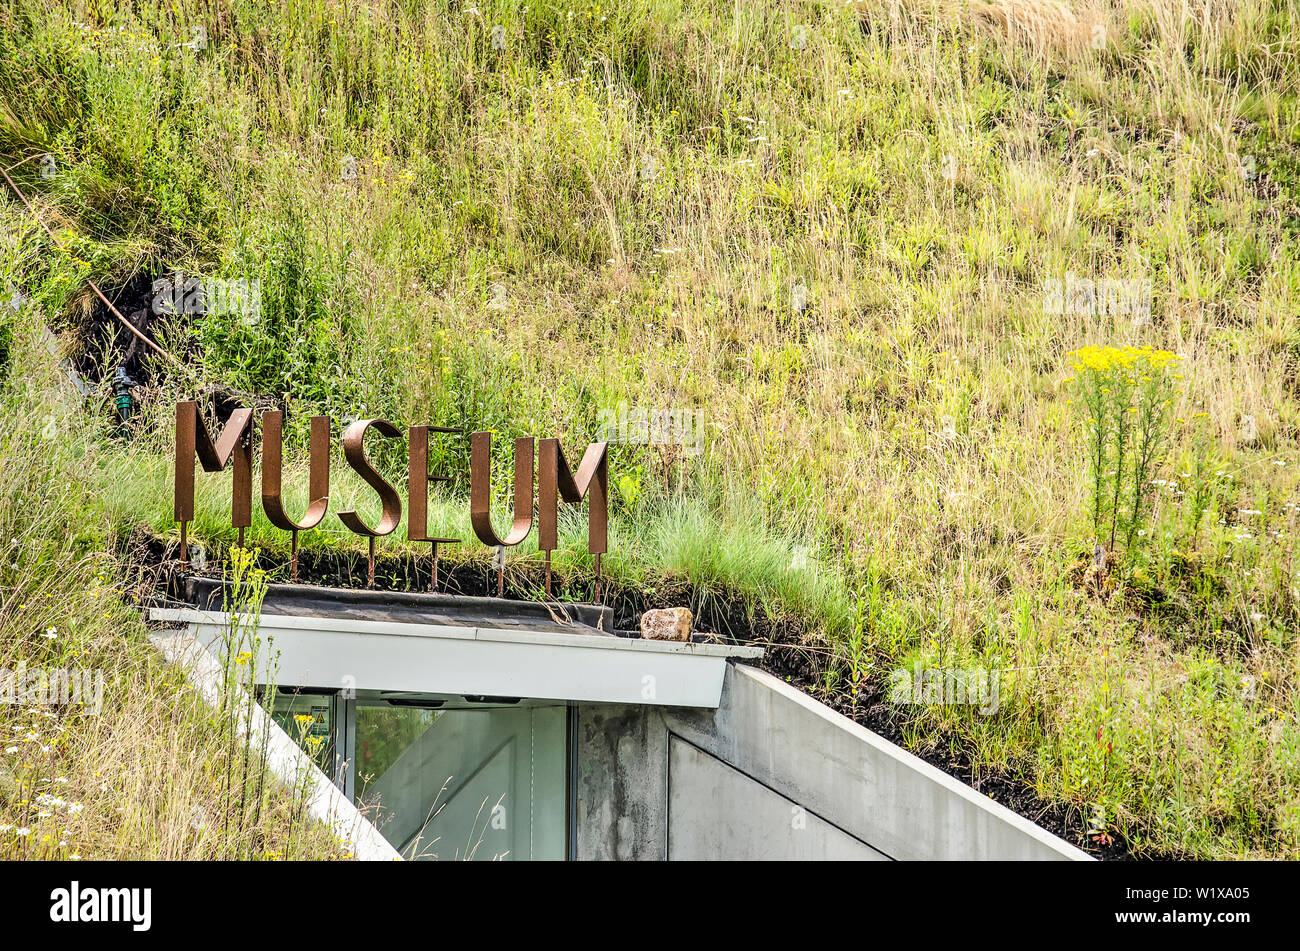 Werkendam, The Netherlands, July 3, 2019: corten steel letters surrounded by grass and wildflowers indicate the entrance to the Biesbosch museum Stock Photo